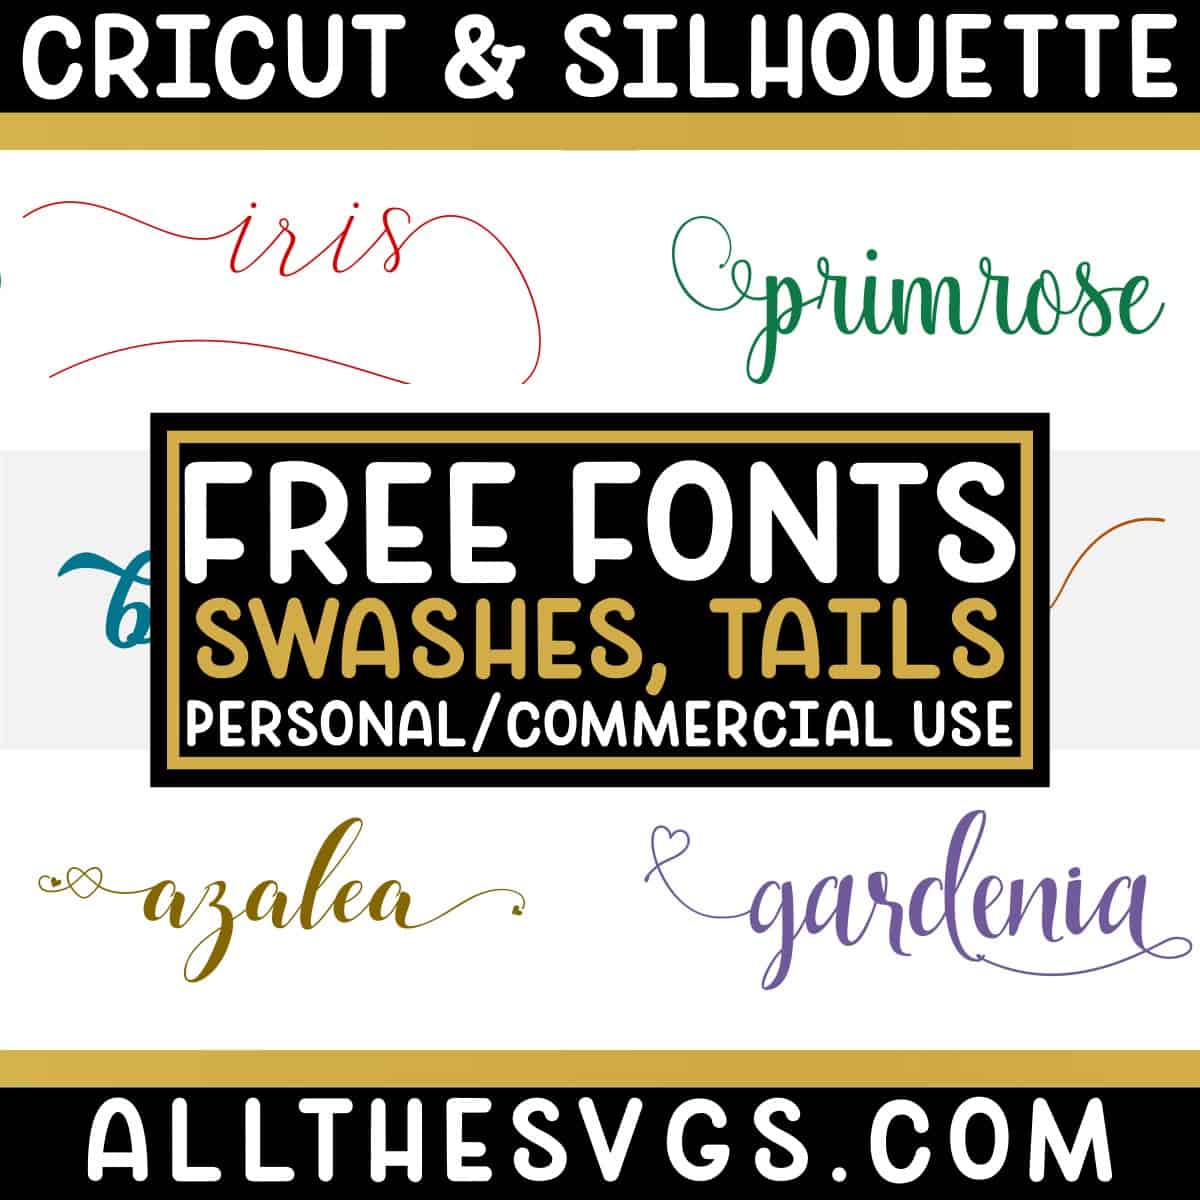 swirly fonts with glyphs